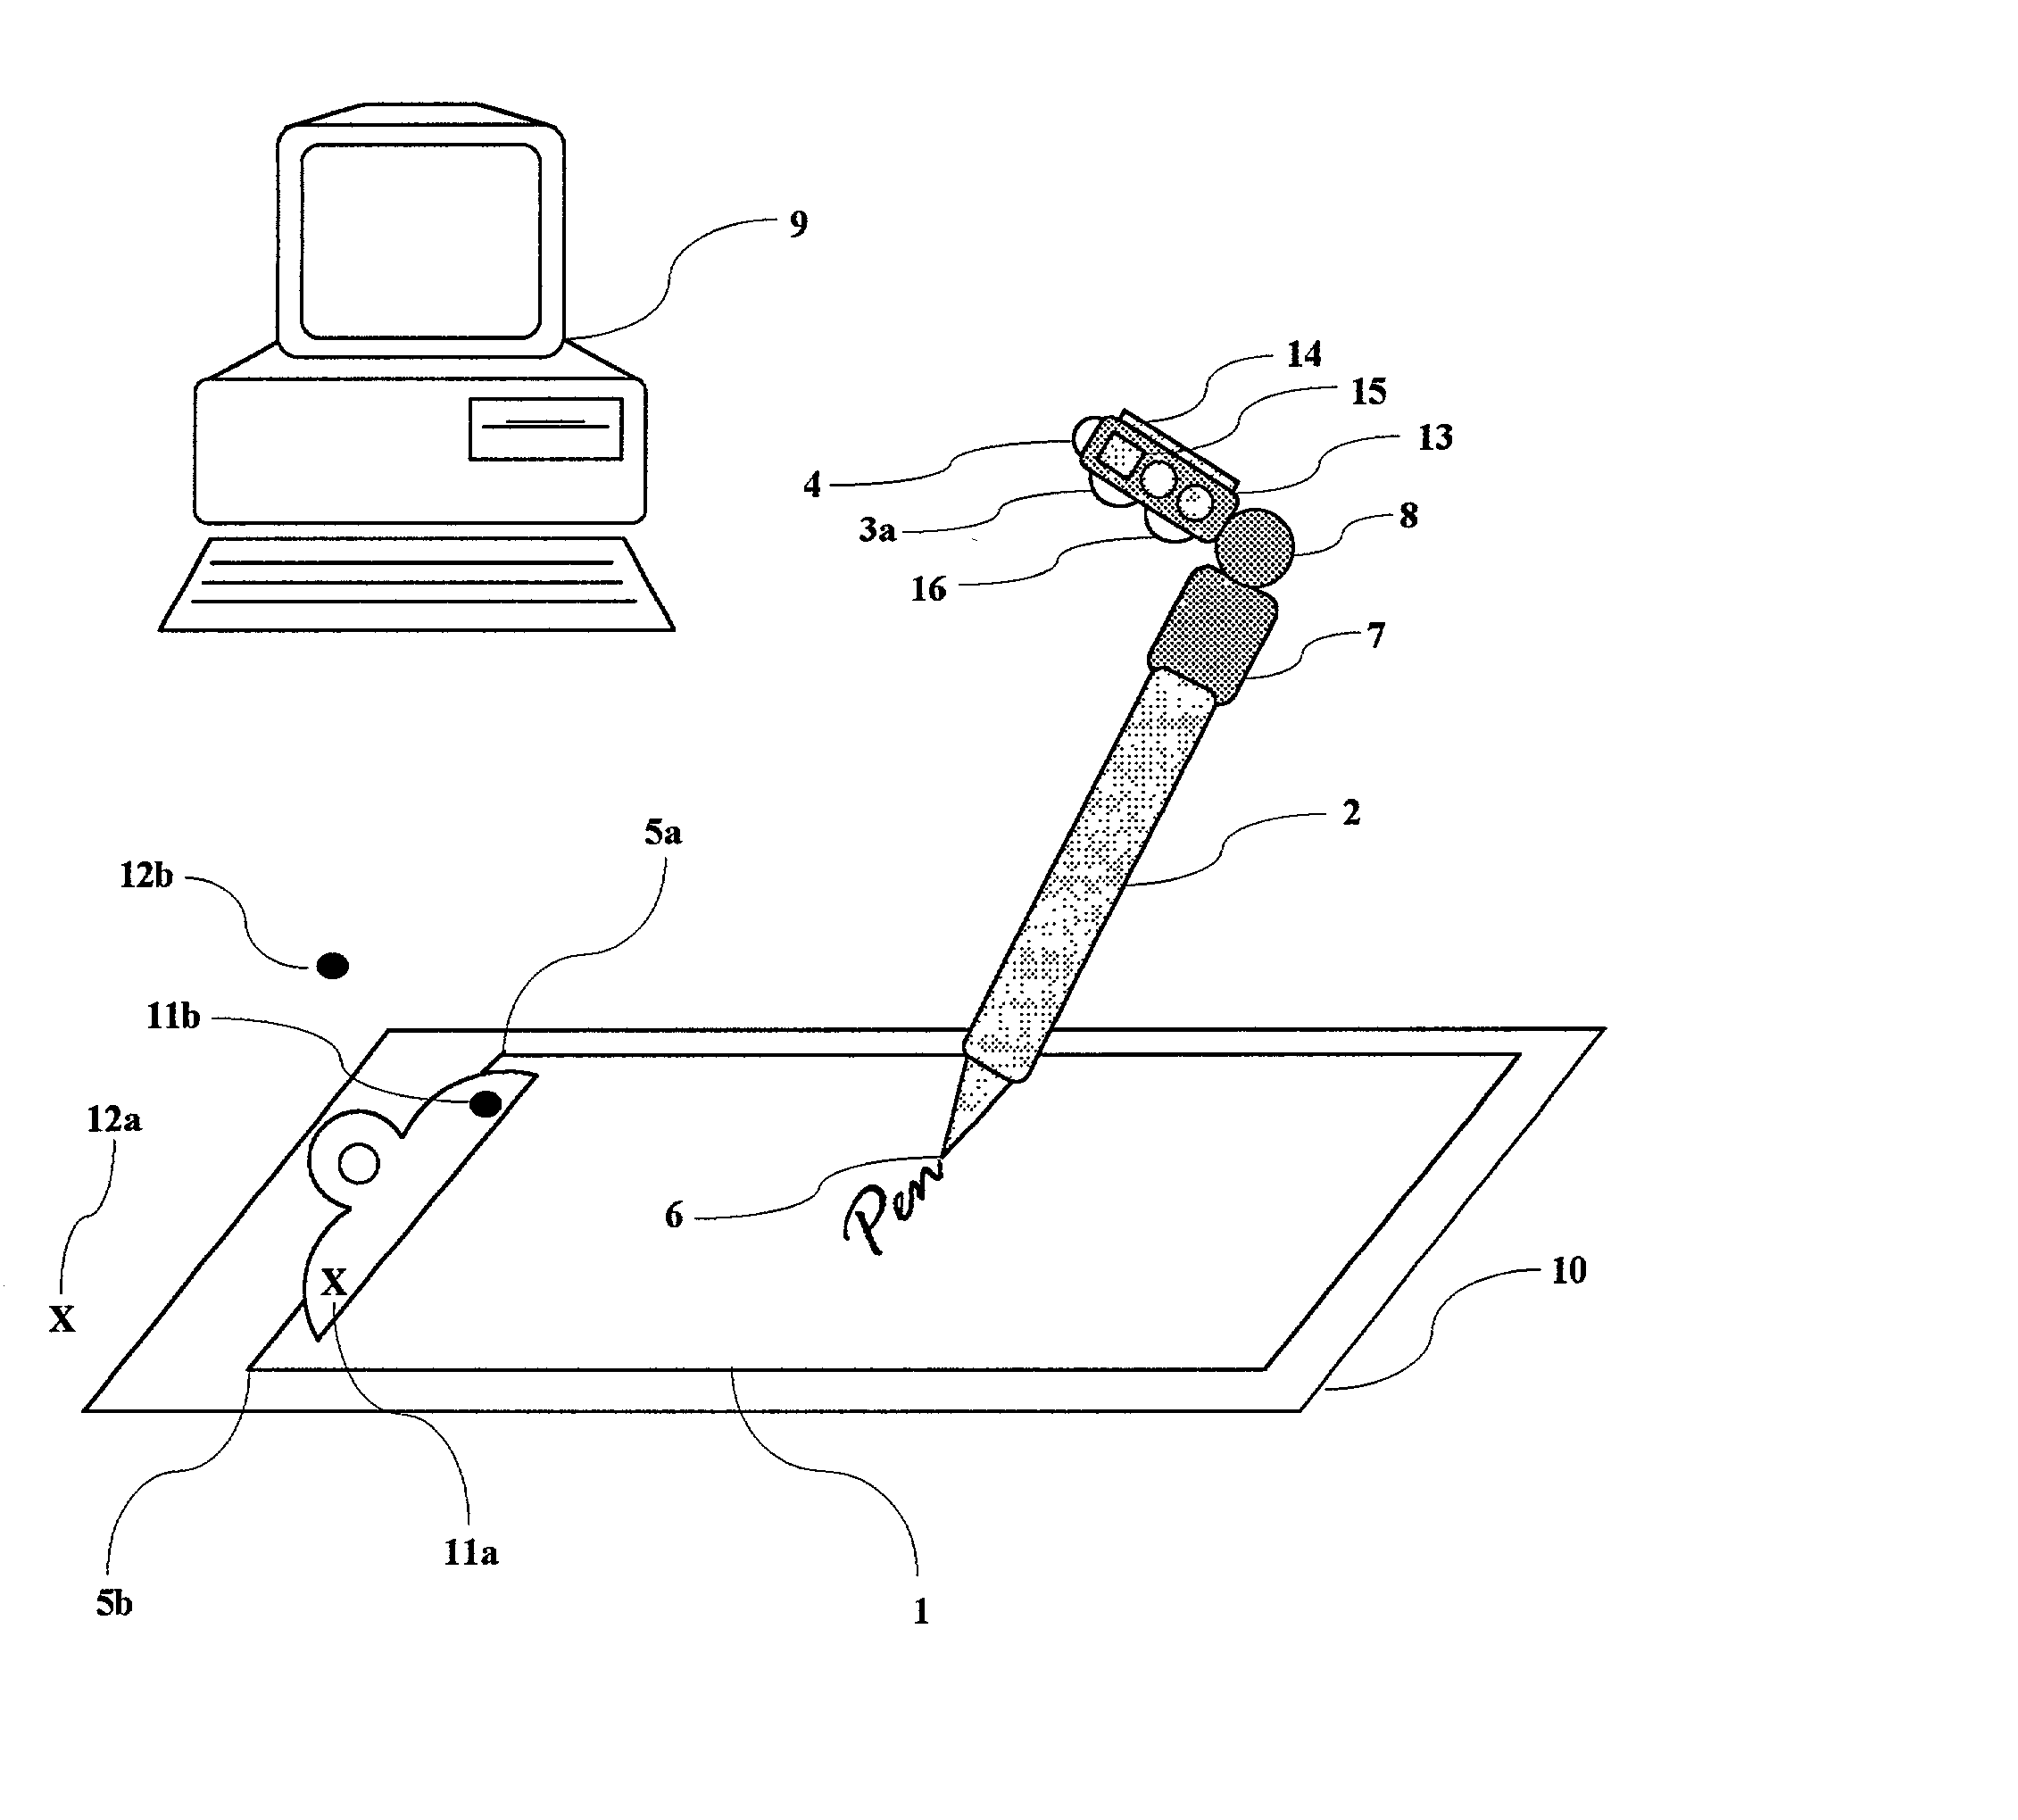 Optical position determination on any surface